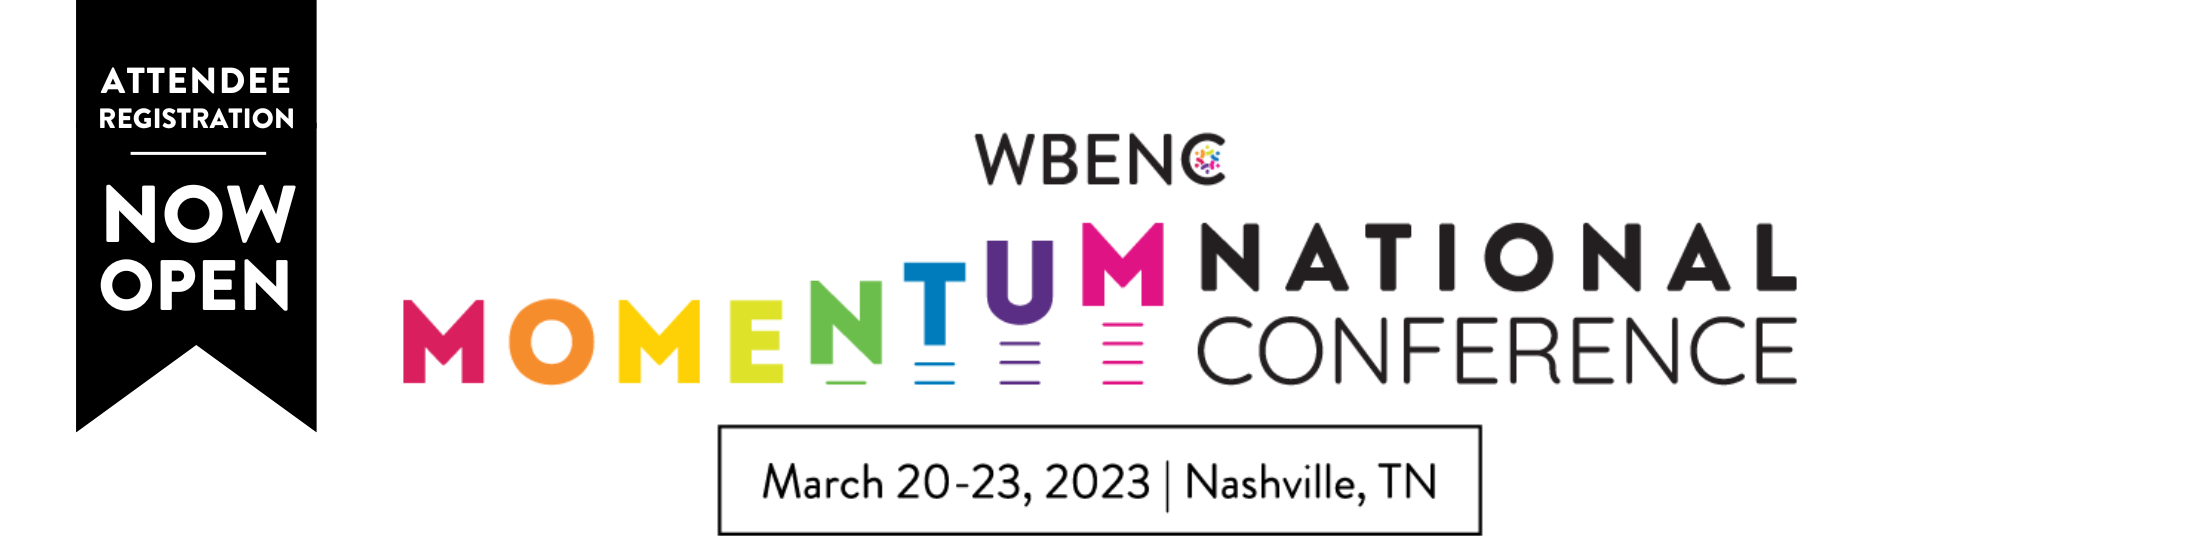 WBENC Momentum National Conference 2023 - Attendee registration now open